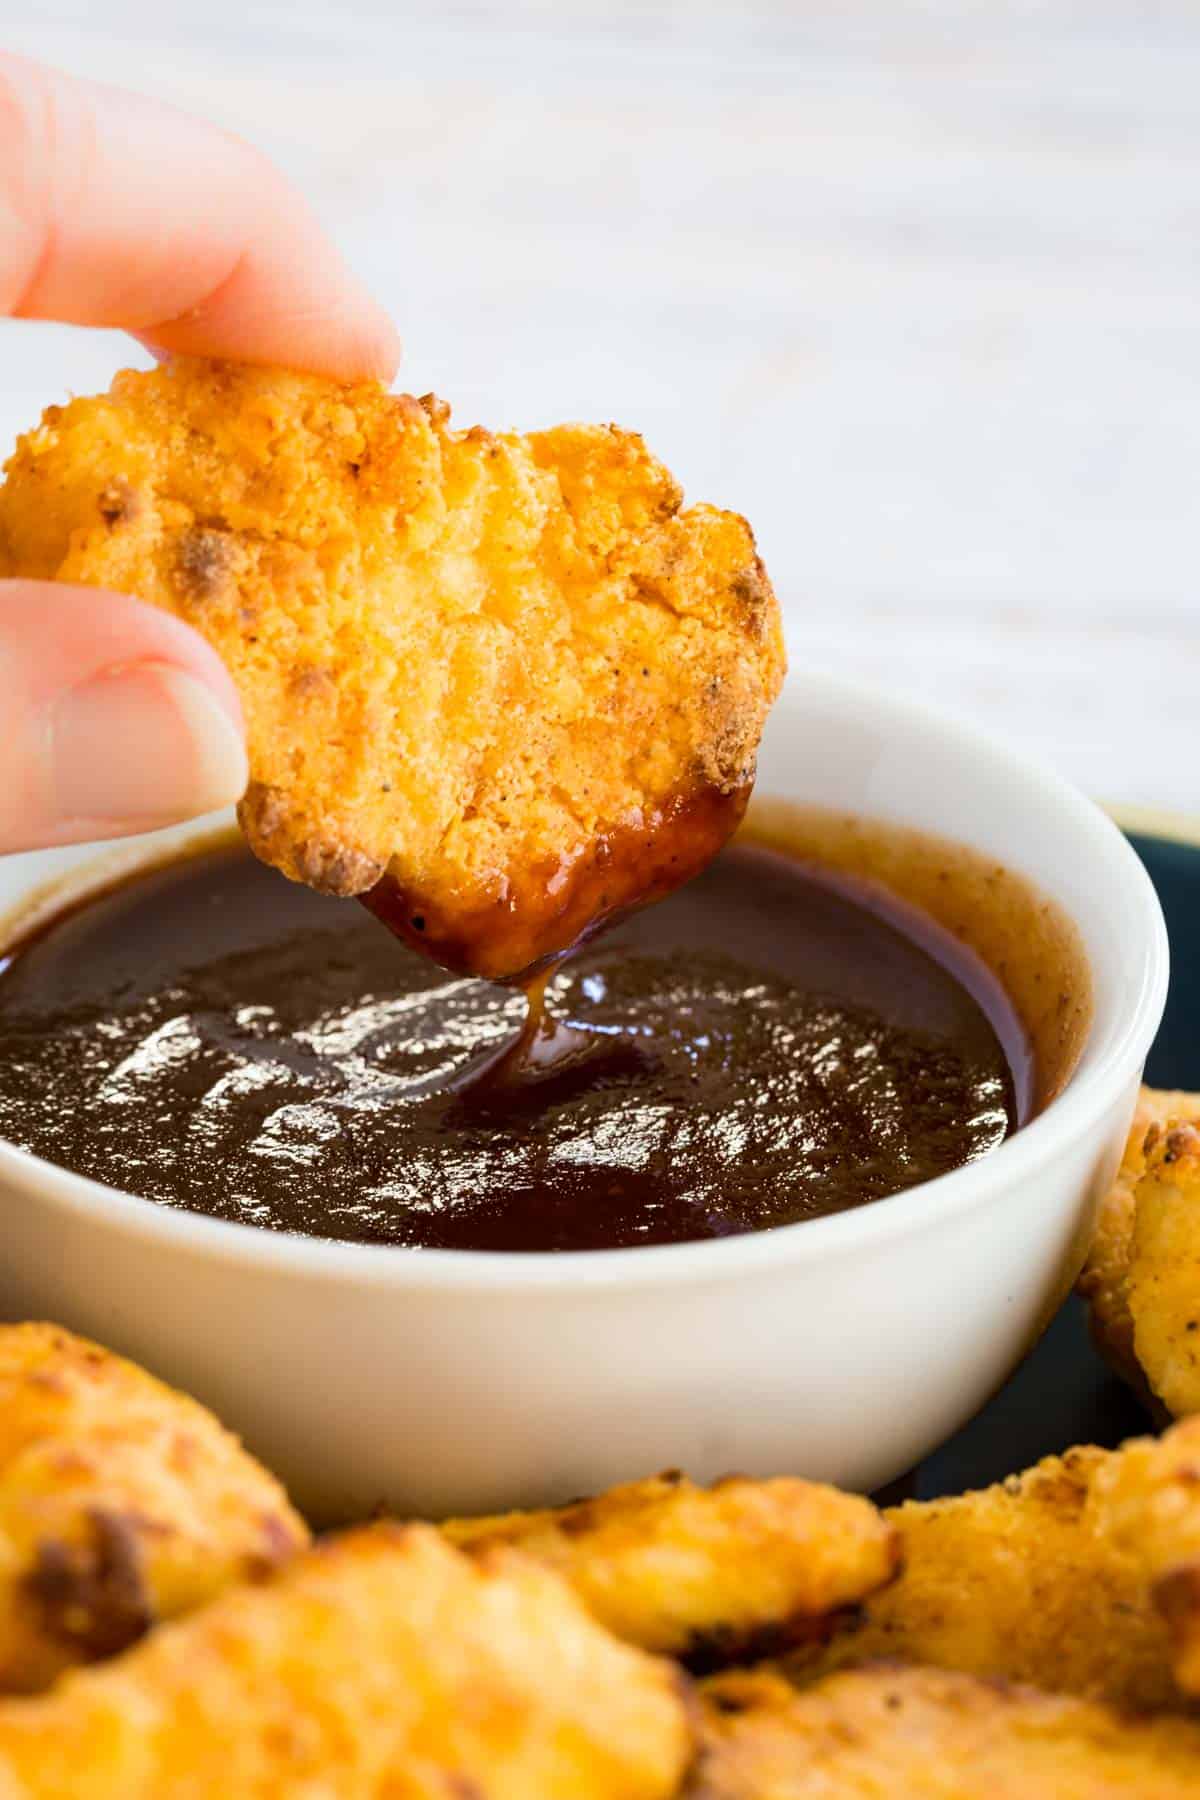 An air fried chicken nugget is dipped into BBQ sauce.